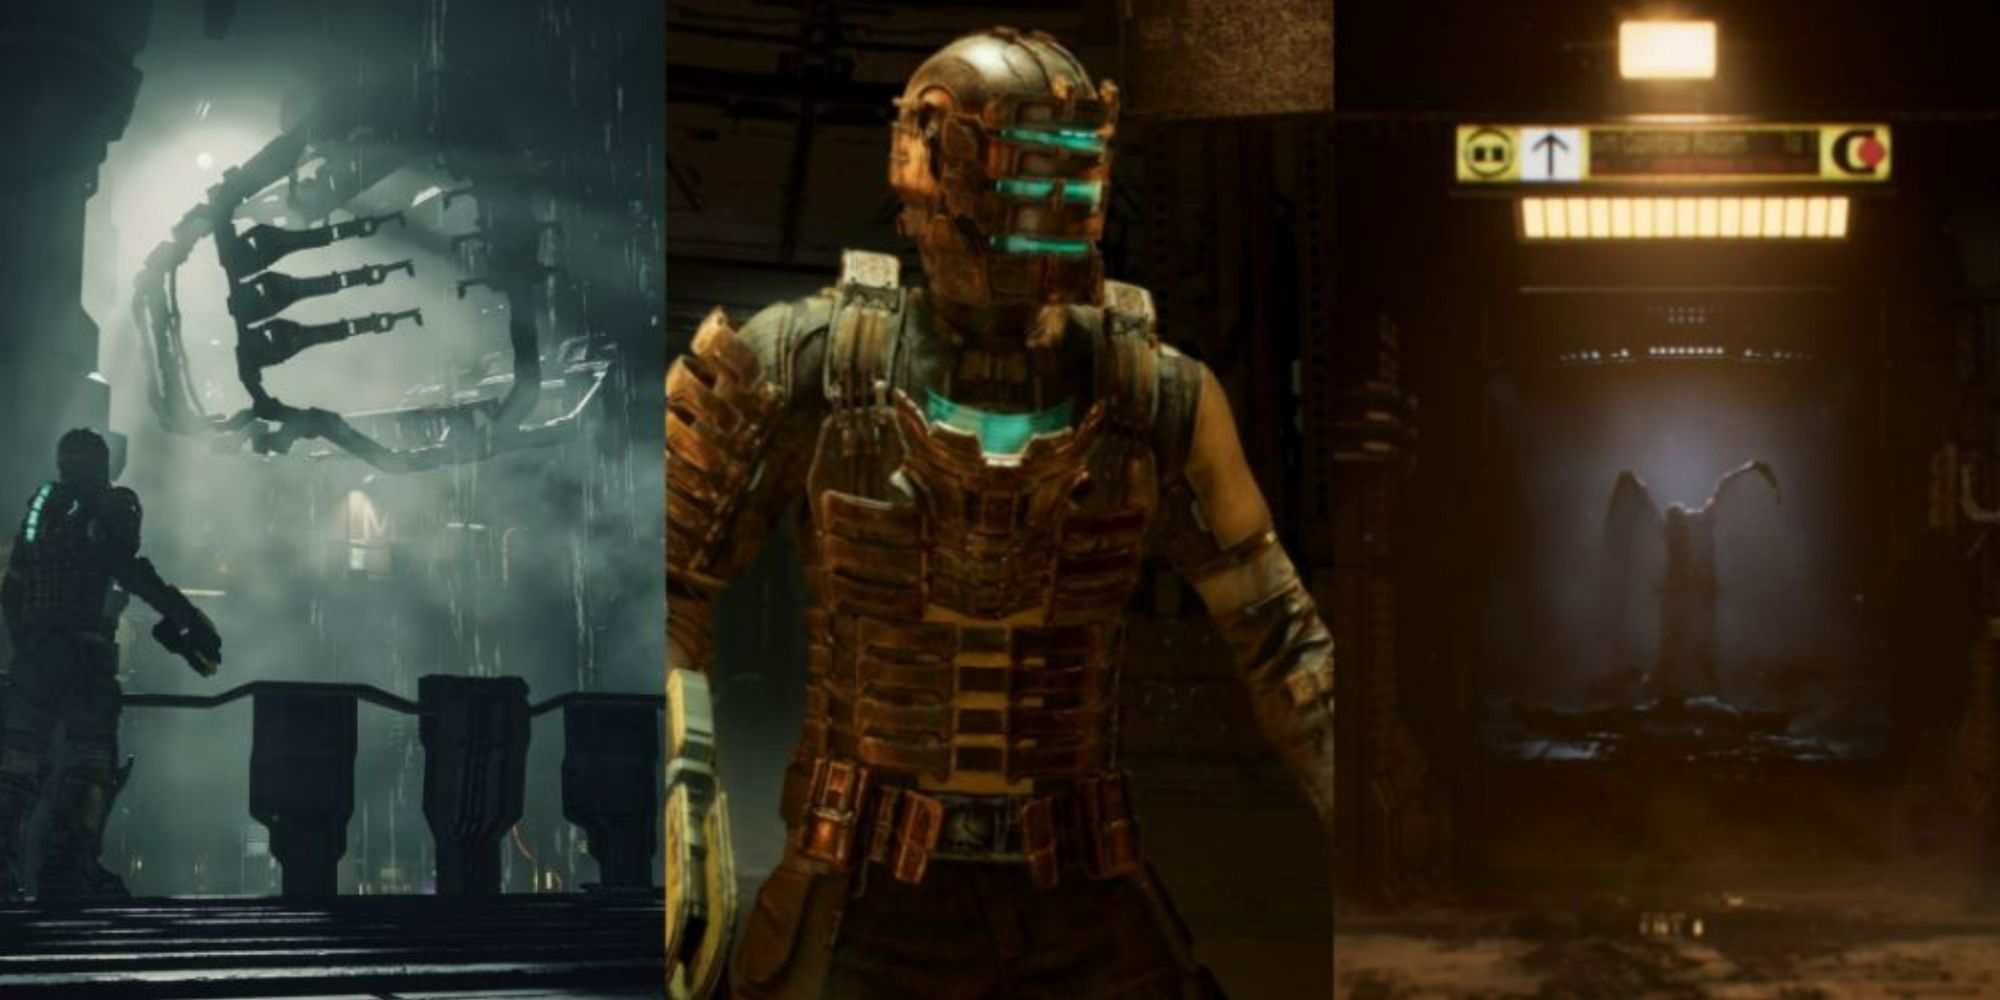 Image collage of Dead Space screenshots featuring Isaac Clarke looking at shuttle, close up of armor, and a necromorph in a doorway